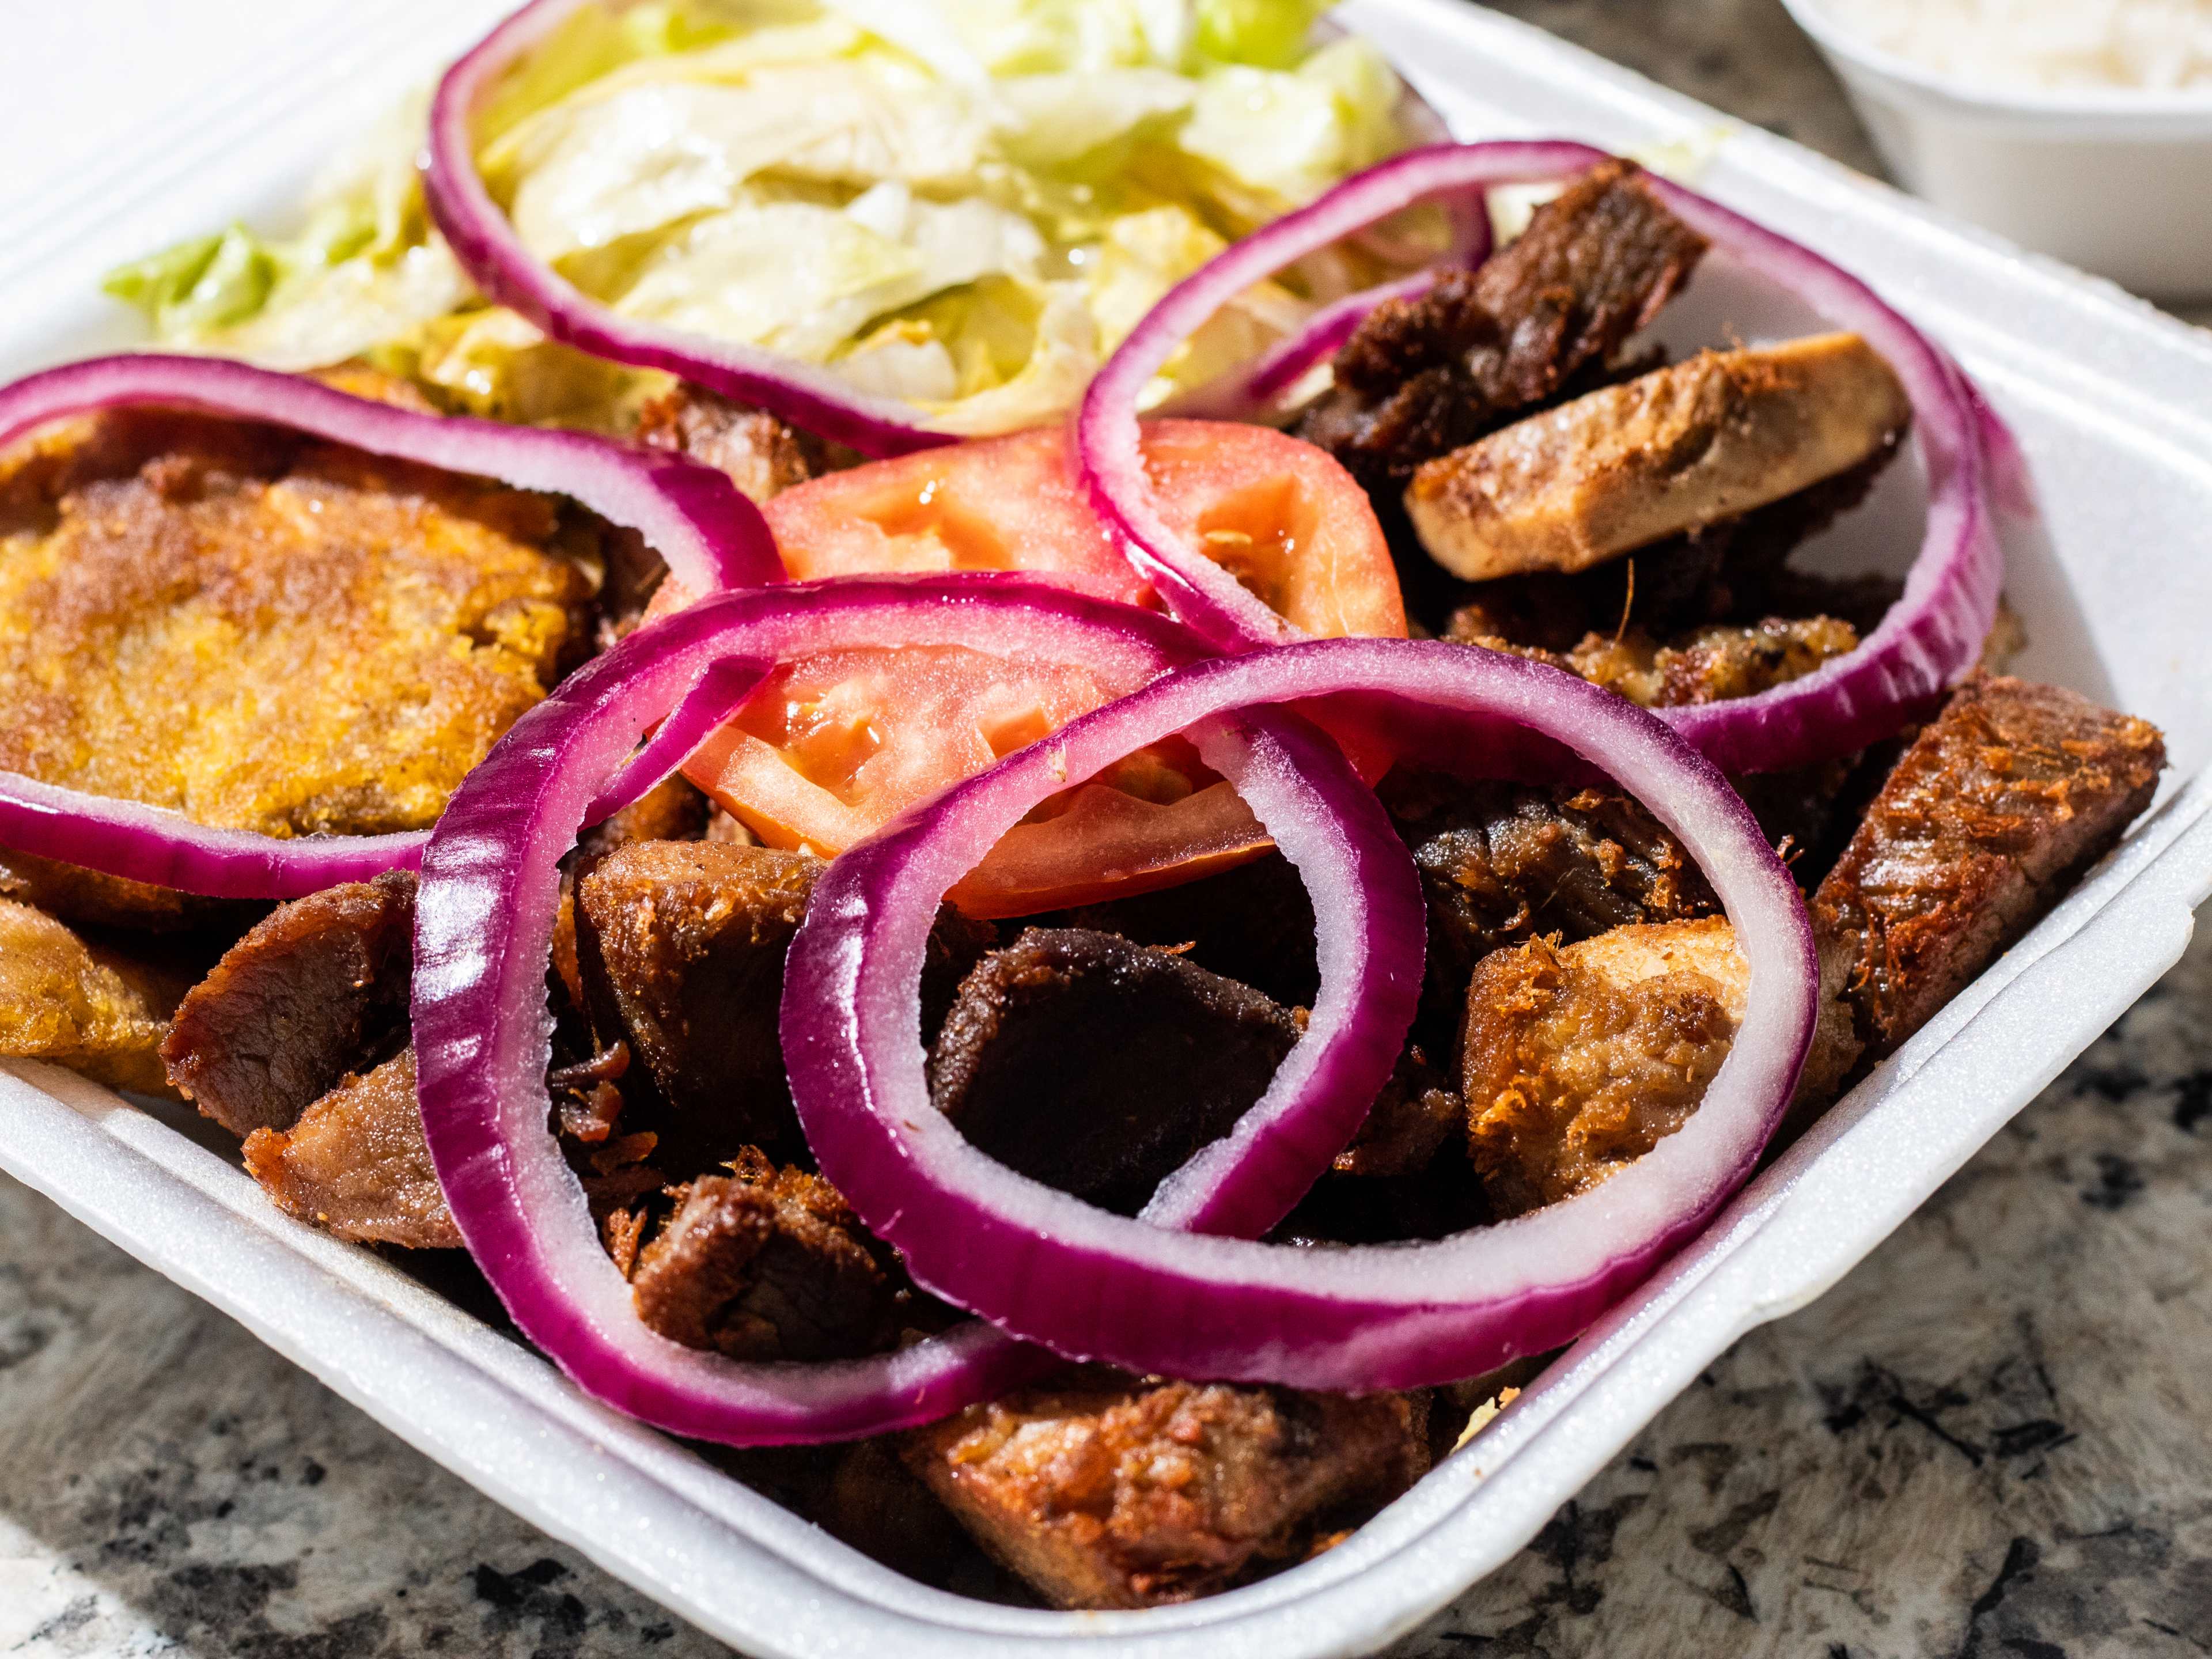 A takeout box of griot with rings of red onion on top.